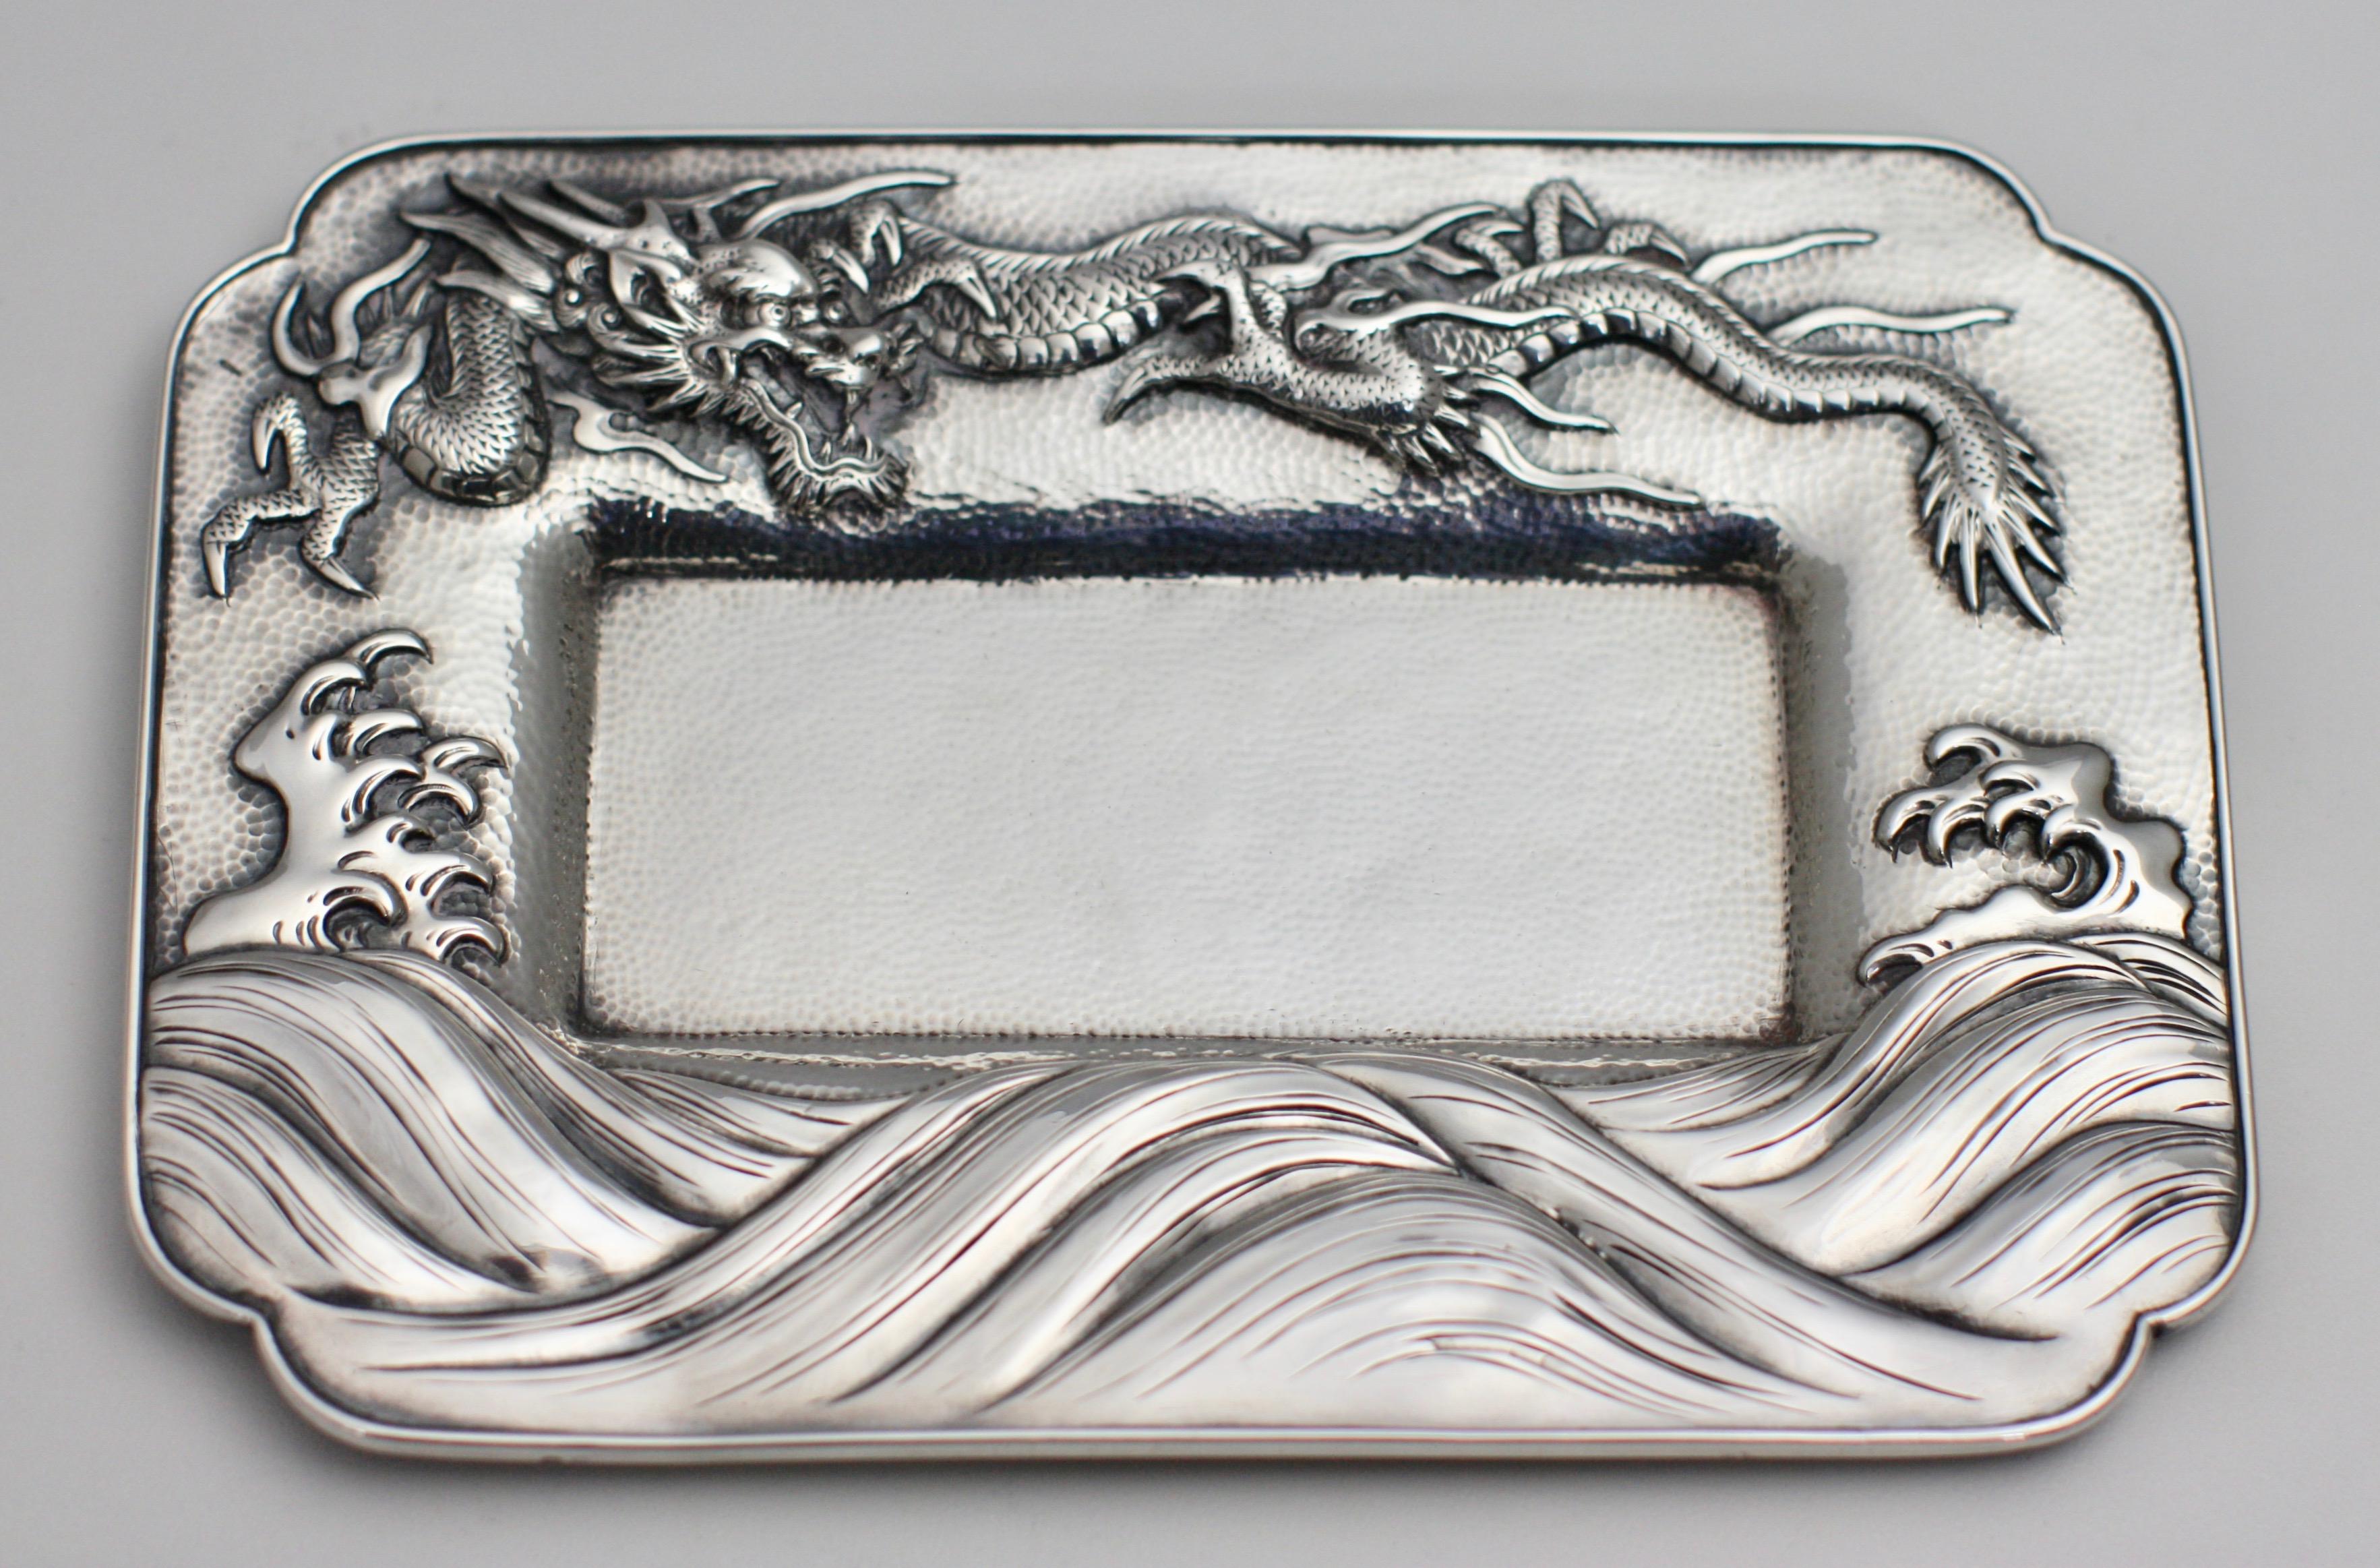 Japanese sterling silver pan tray
Meiji Period (1868-1912).
Stamped Arthur & Bond, Yokohama, Sterling.
Chased in relief with a dragon above waves.
Measures: Width 4 3/8 in. (11.11 cm.)
Length 6 3/8 in. (16.19 cm.)
Provenance: Formerly from an